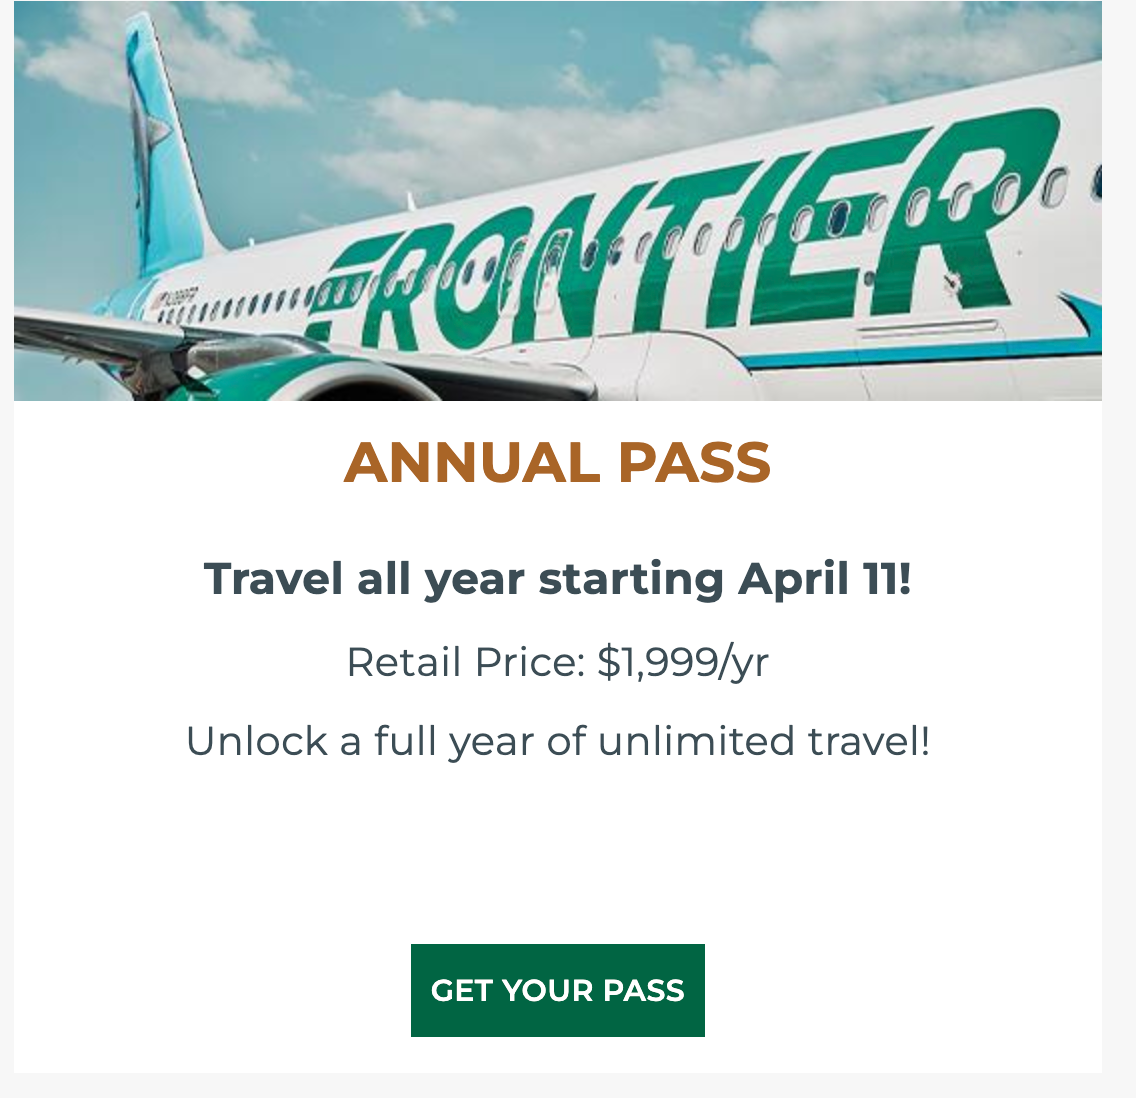 annual pass ad